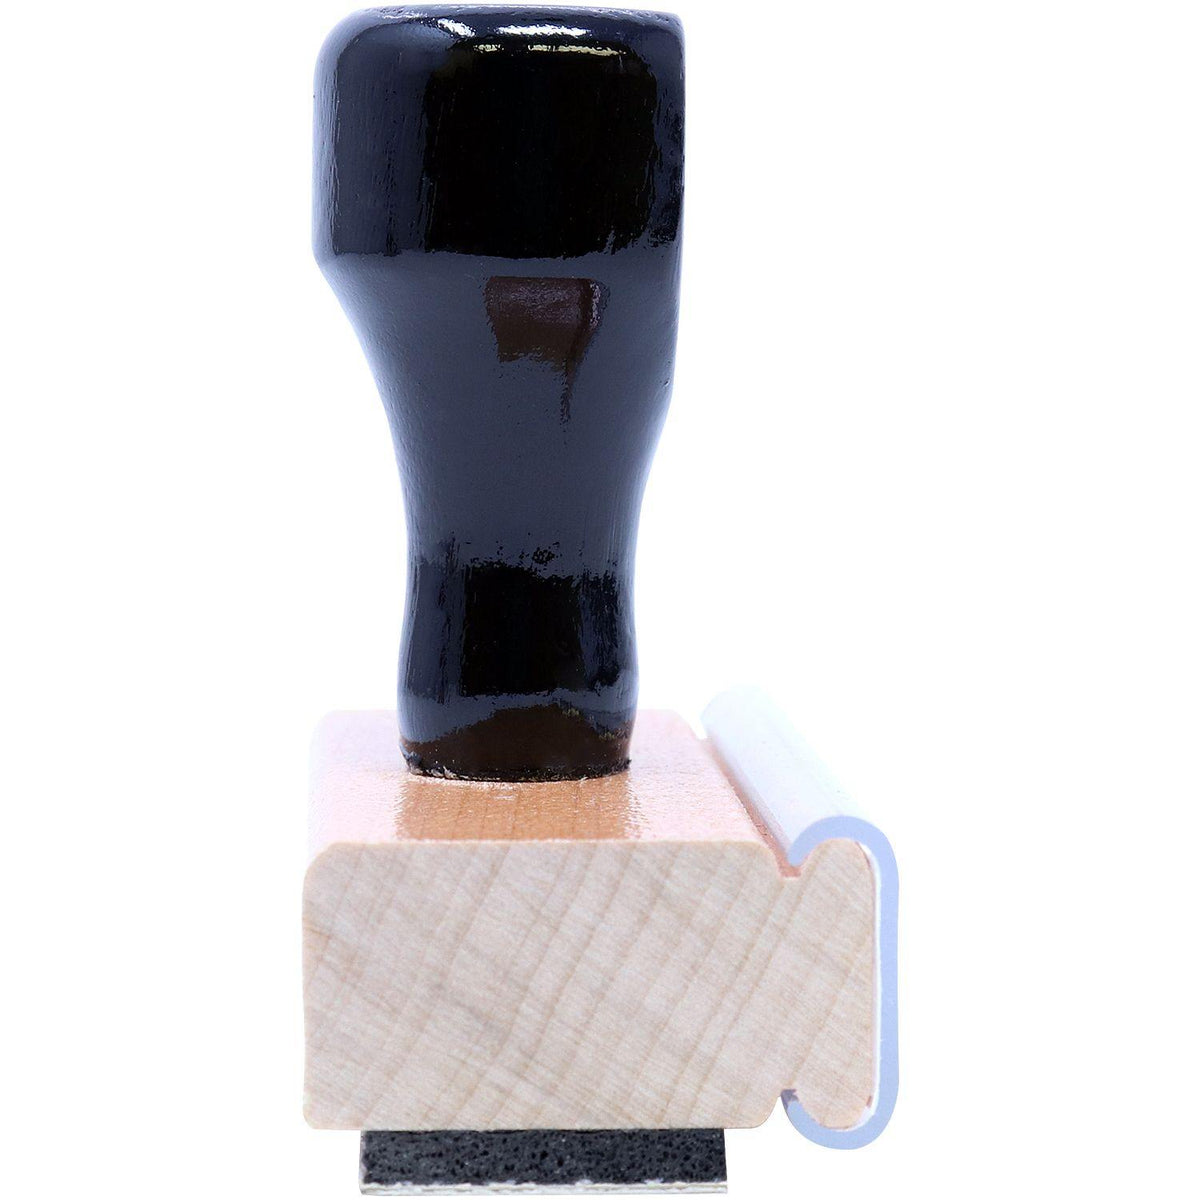 Side View of Large Patients Signature on File Rubber Stamp